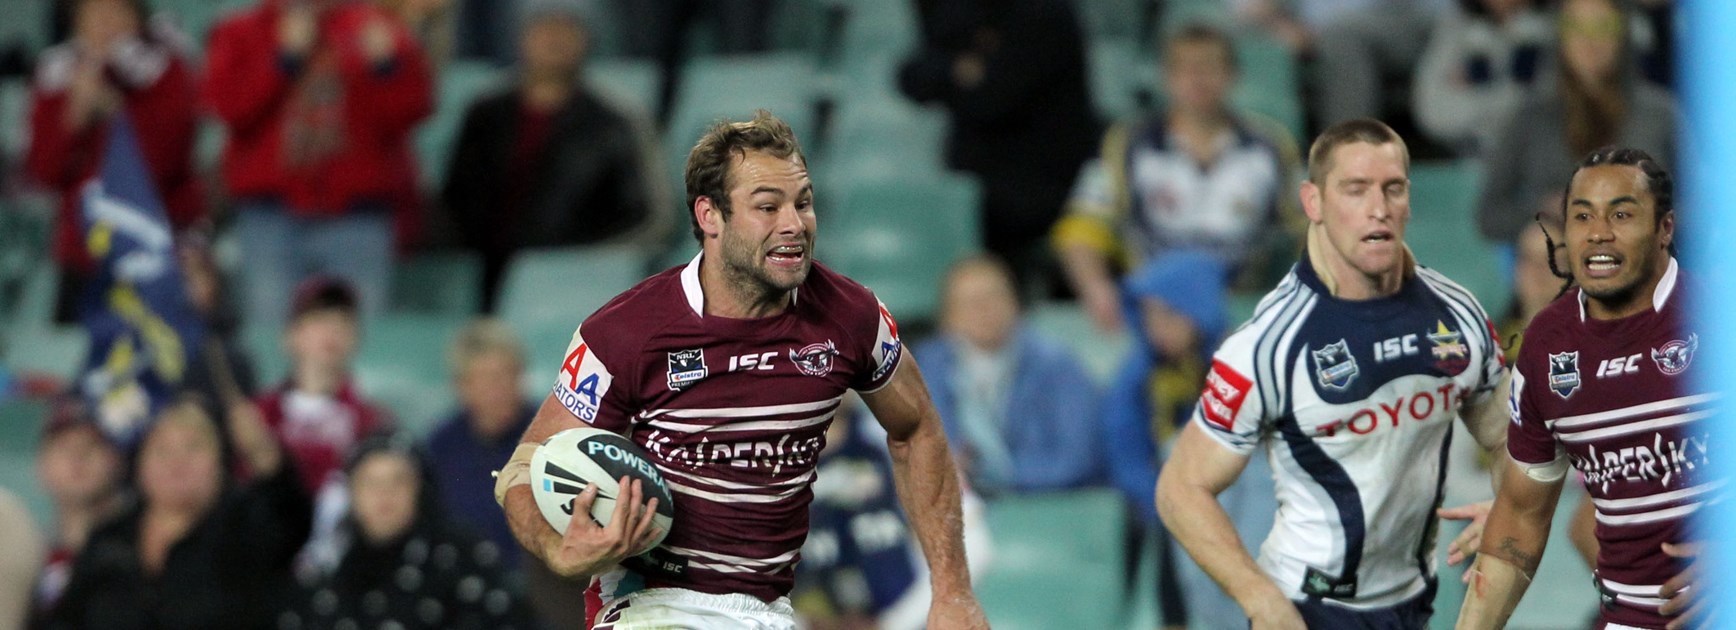 Great Sea Eagles memories through Archives series